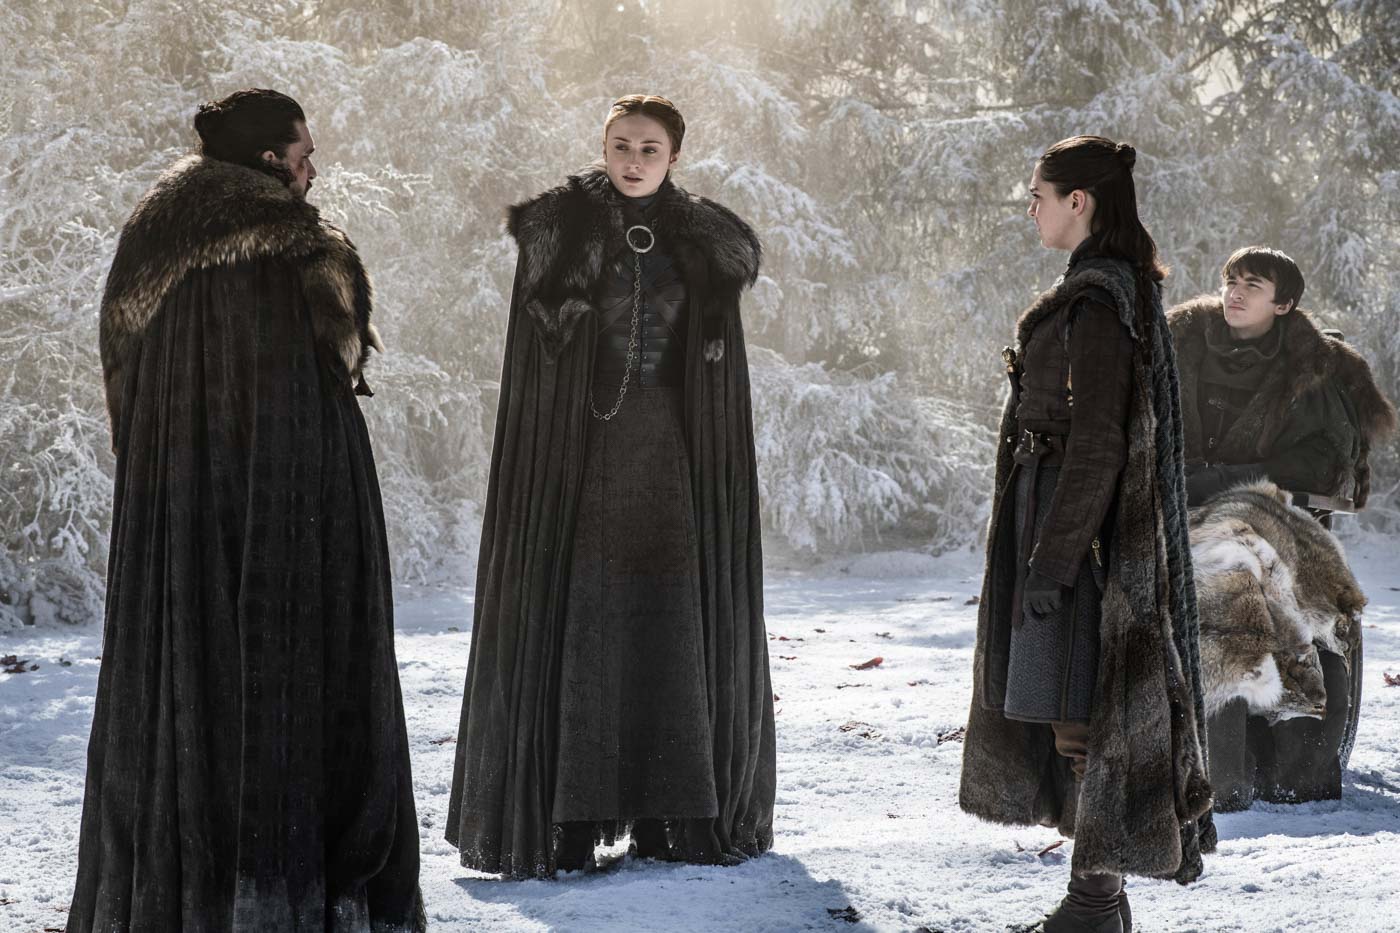 LAST EPISODE. Actors Kit Harington as Jon Snow, Sophie Turner as Sansa Stark, Maisie Williams as Arya Stark, and Isaac Hempstead Wright as Bran Stark  during a scene from episode 4 of 'Game of Thrones.' Photo by Helen Sloan/HBO   